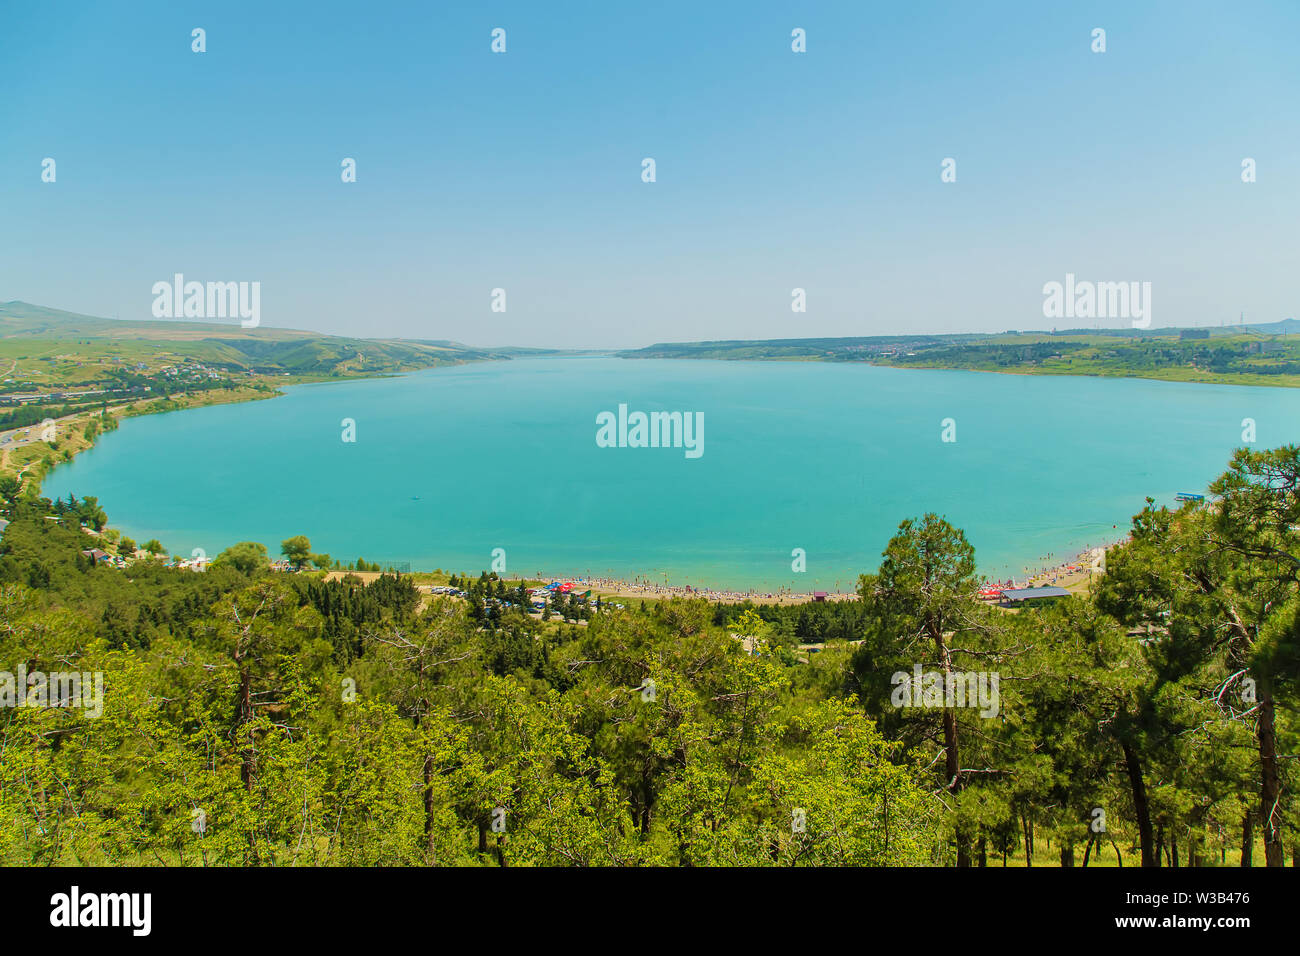 Tbilisi reservoir. View from above. Selective focus nature Stock Photo